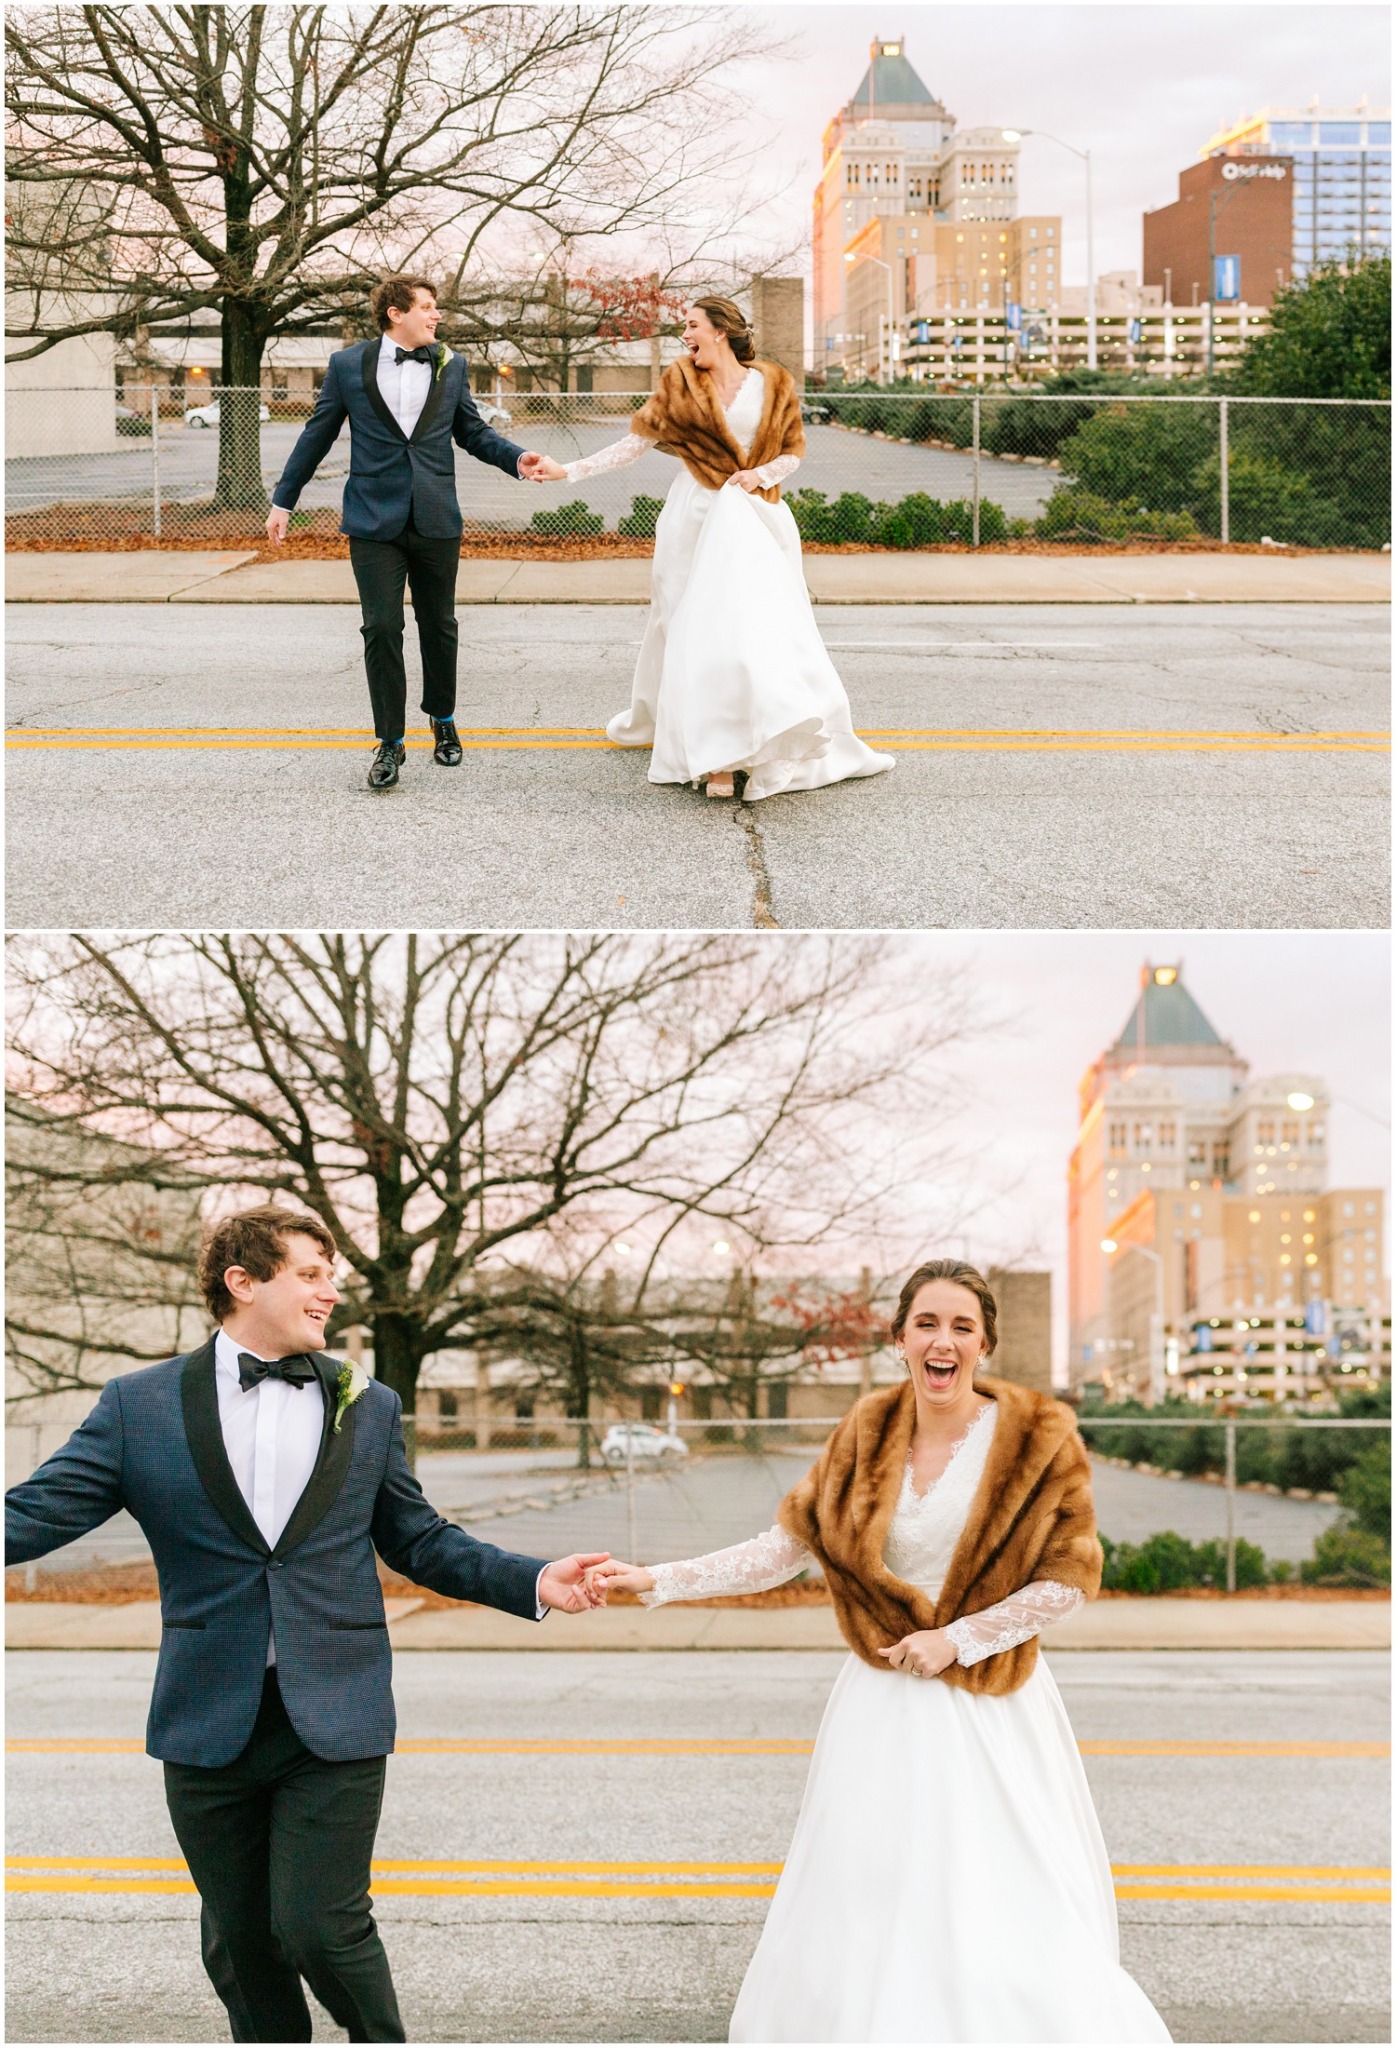 groom in navy and black suit and bride with fur walk across street photographed by Chelsea Renay Photography